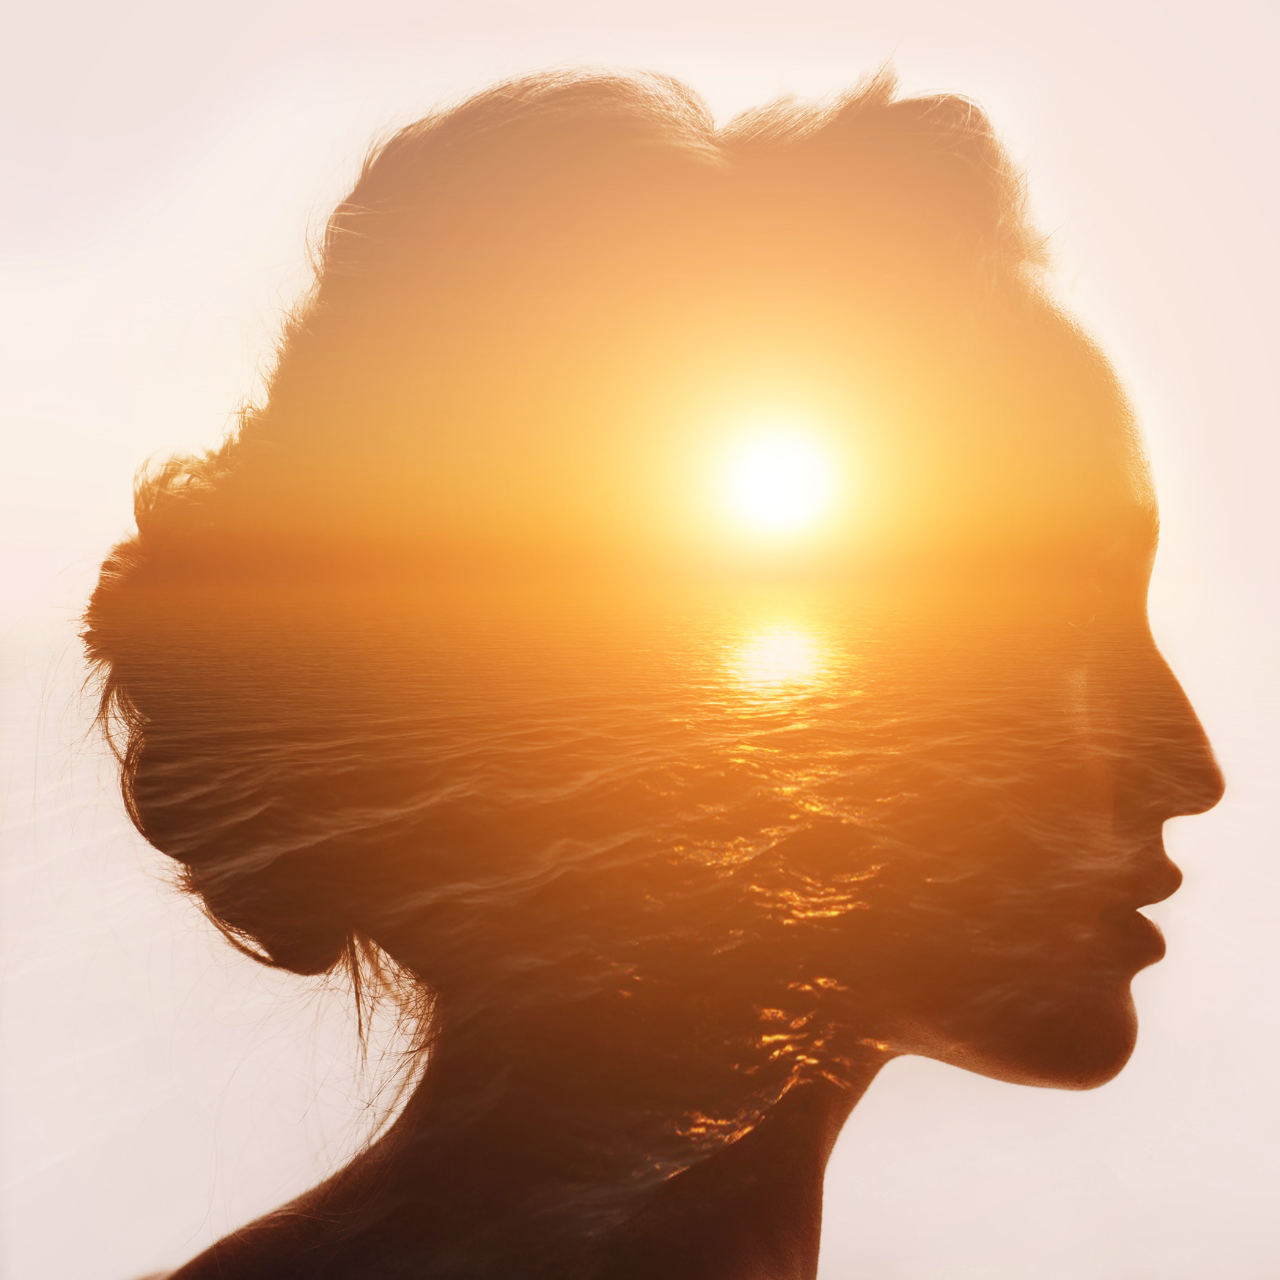 Philosophy concept. Sunrise and woman silhouette.